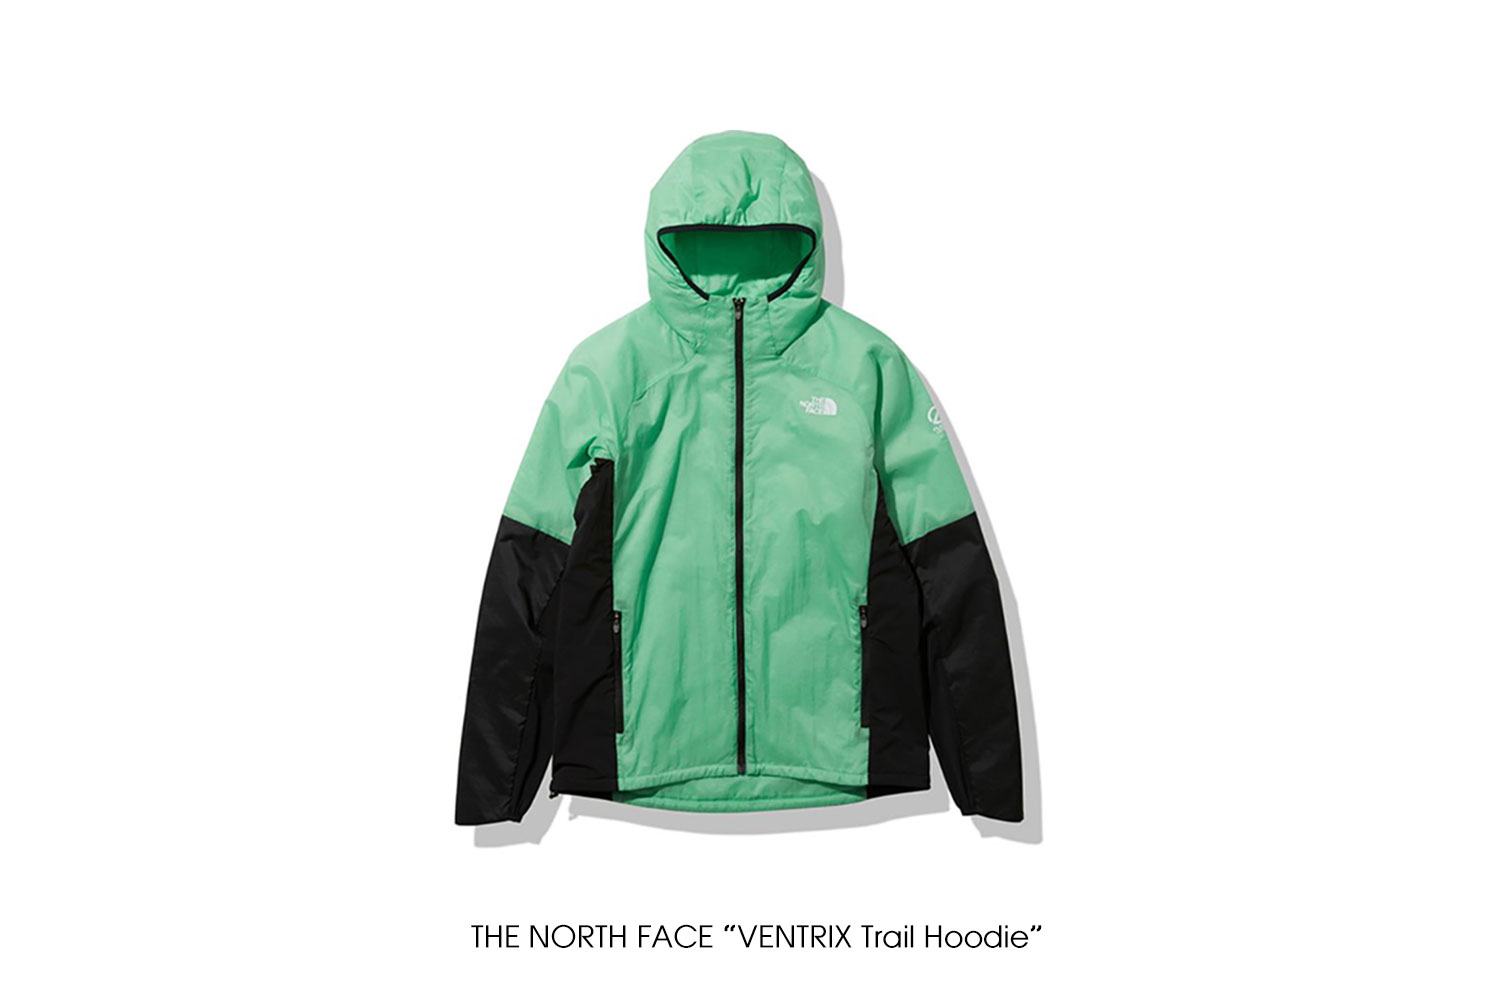 THE NORTH FACE "Ventrix Trail Hoodie"